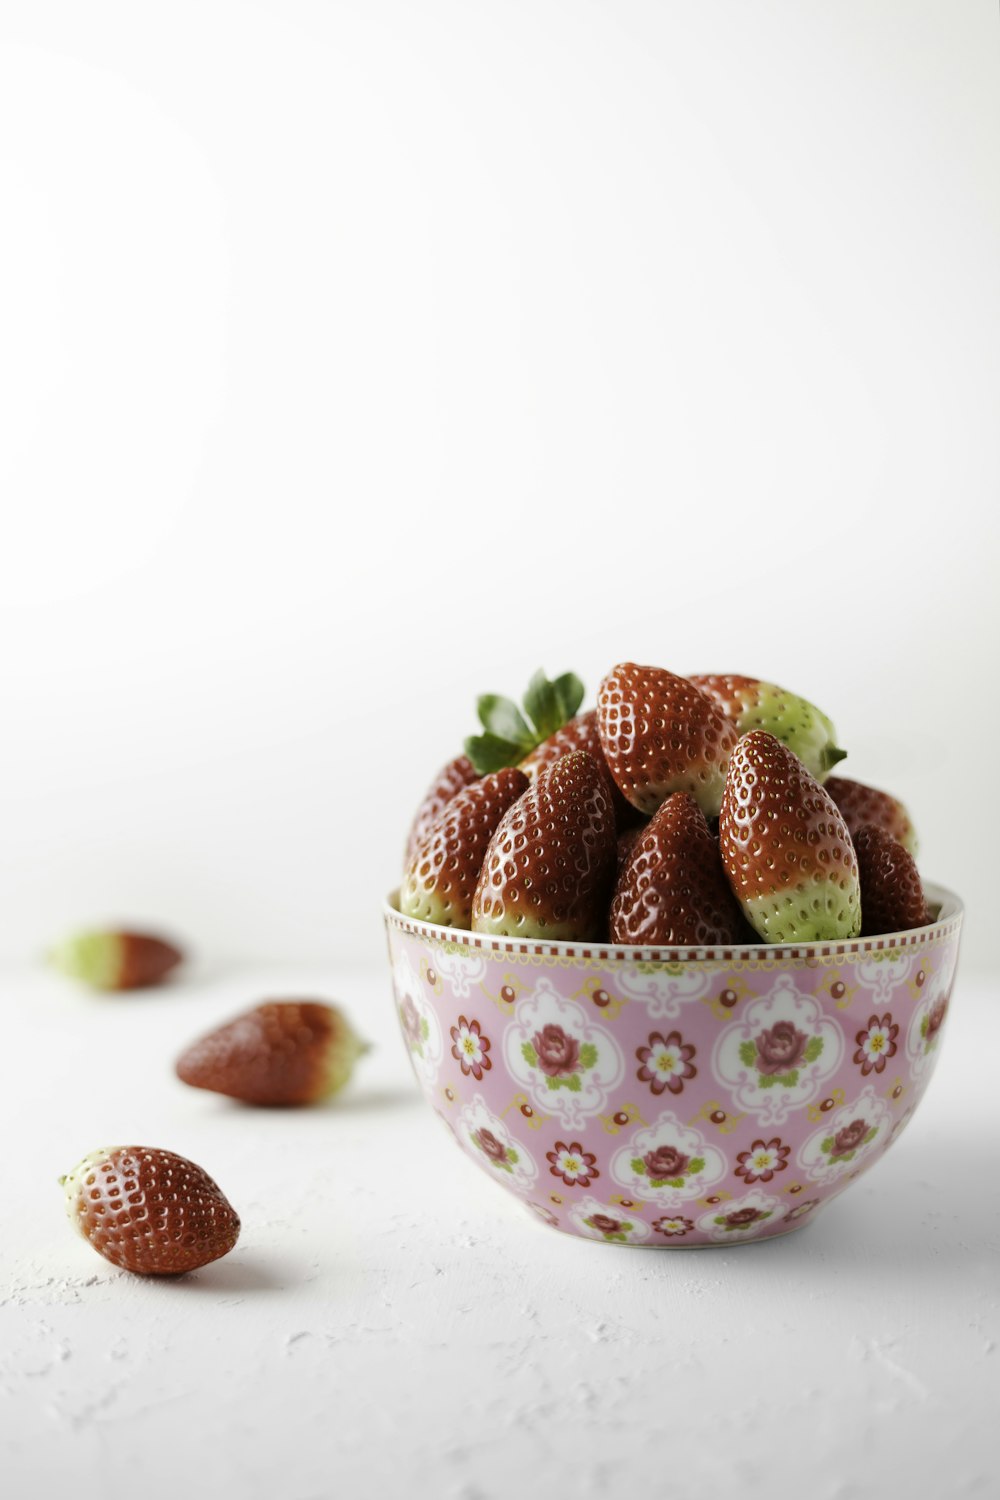 a bowl filled with strawberries on top of a white table